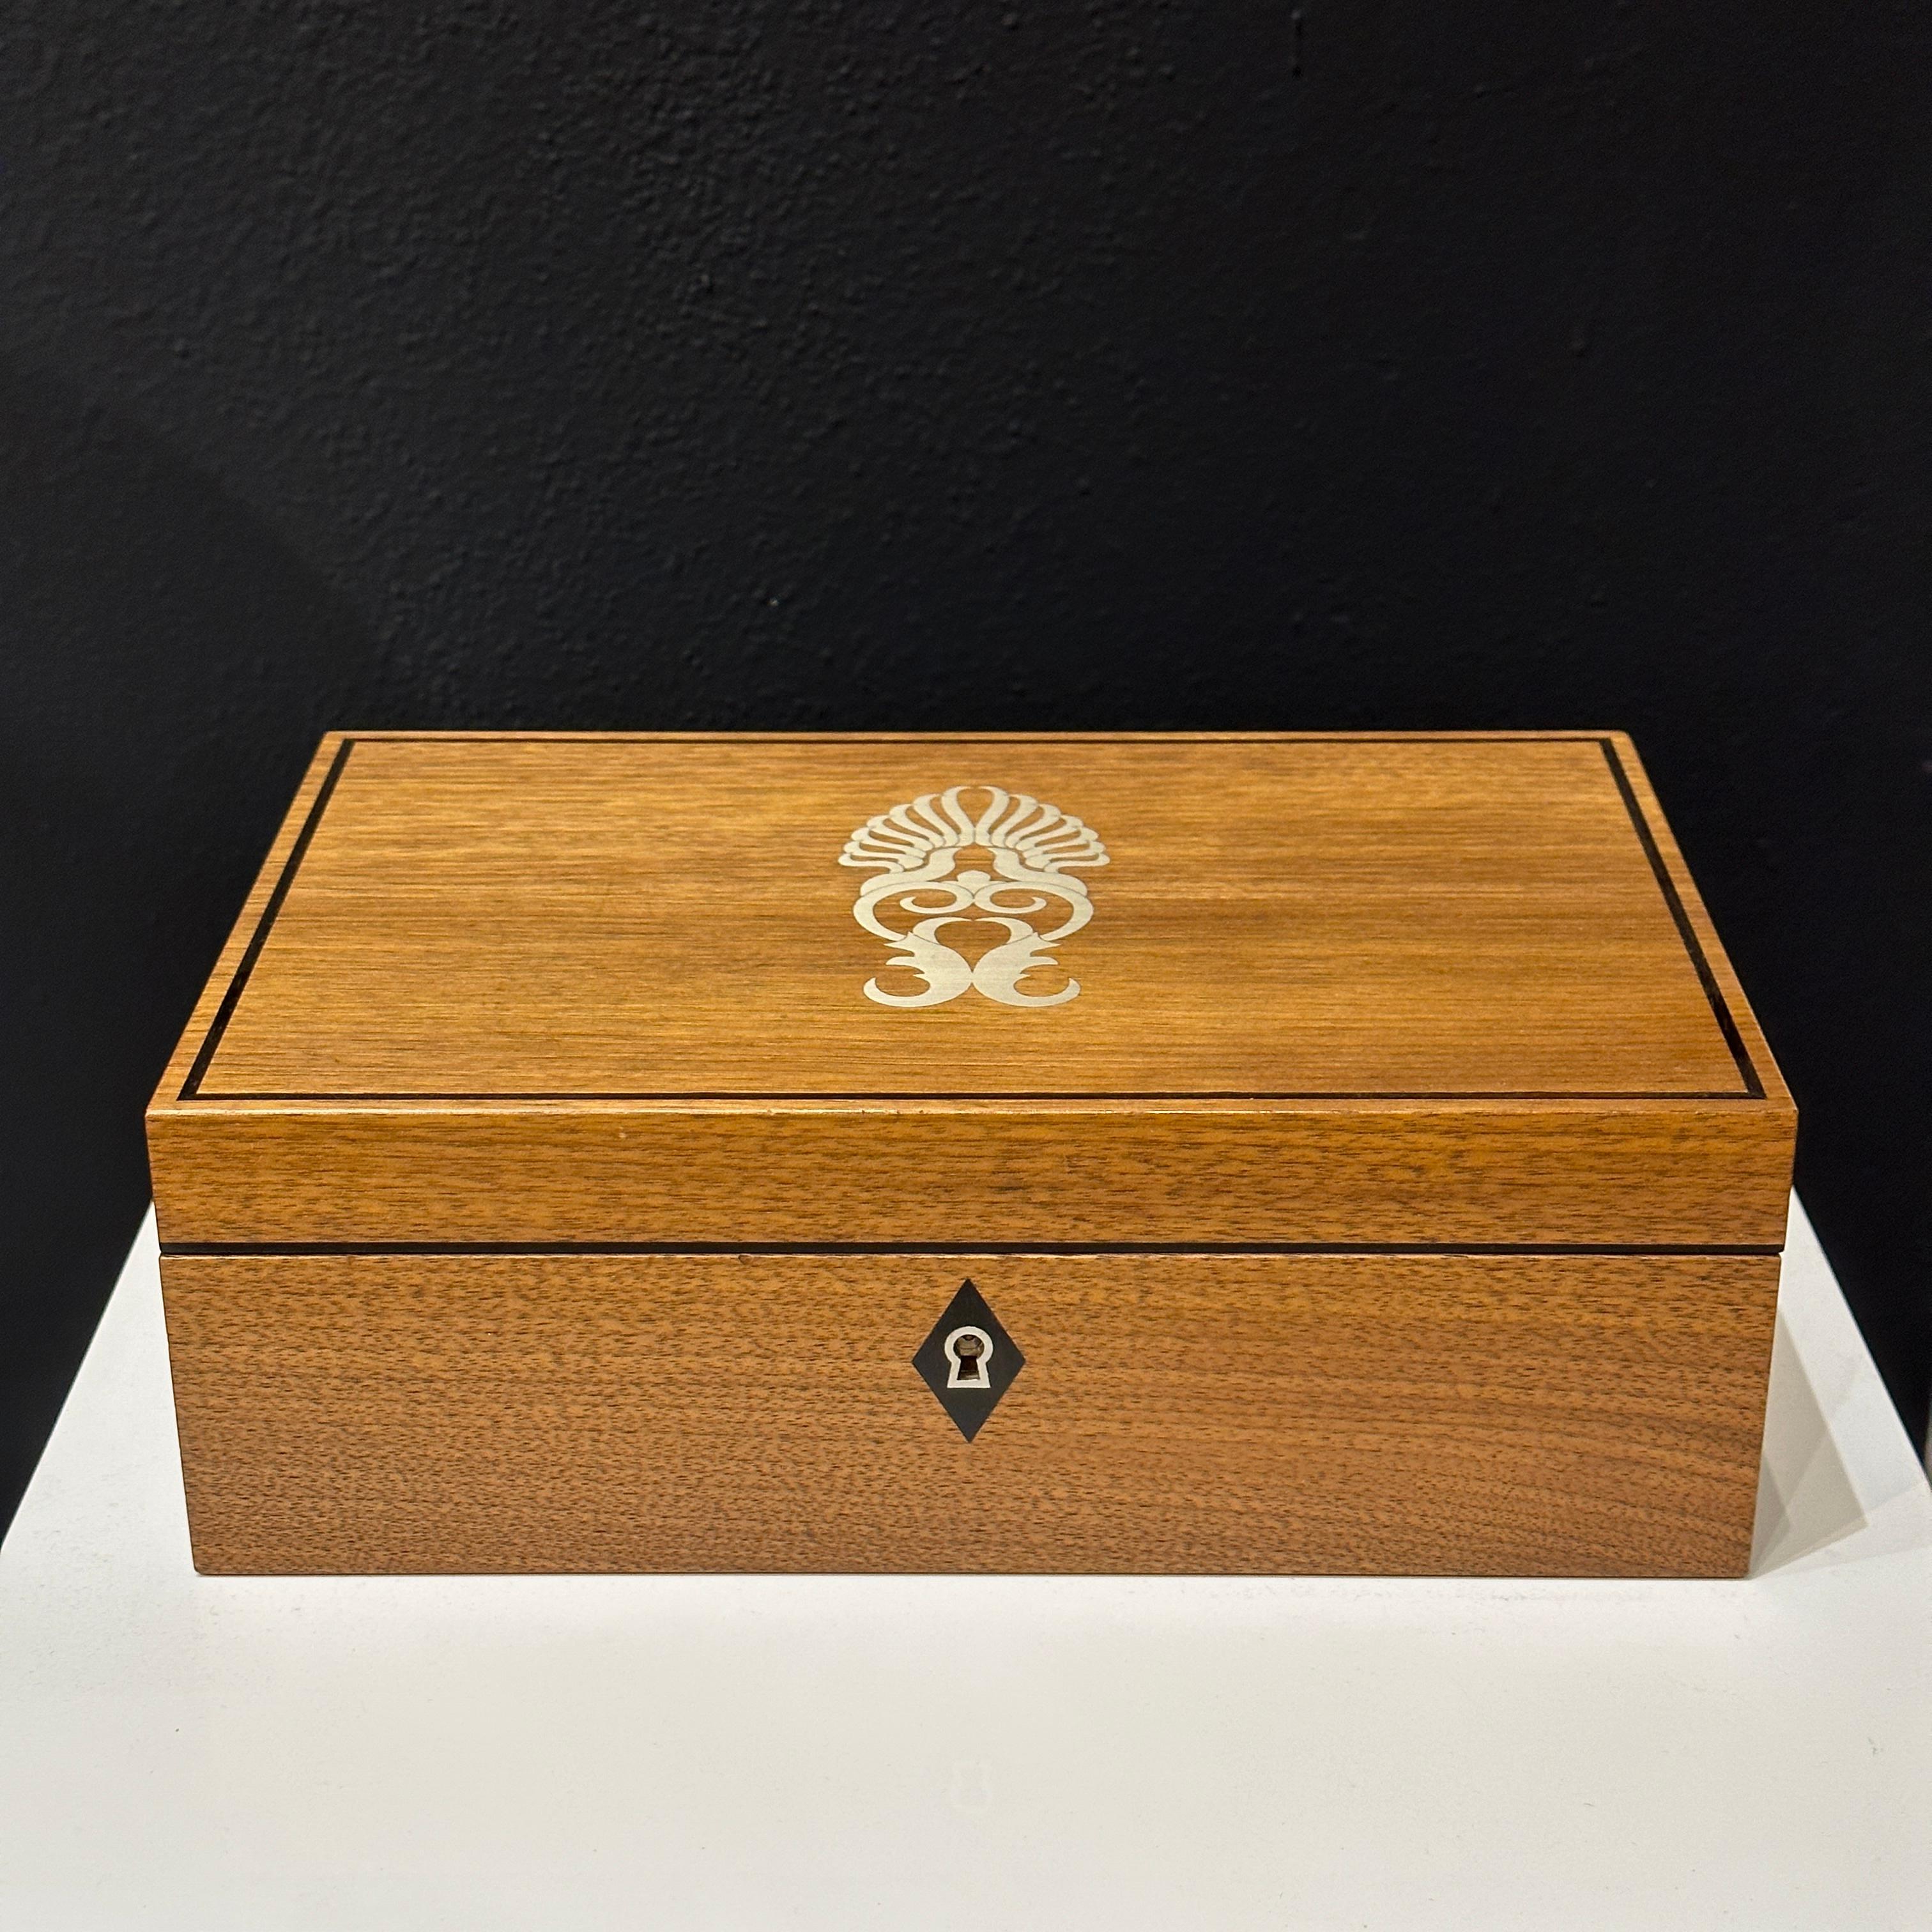 This is a gorgeous wood marquetry watch and cufflink jewelry box with silver inlay made by London producer of fine luxury goods, Linley. This fine box would make an excellent gift for yourself or a special person in your life. The incised LINLEY